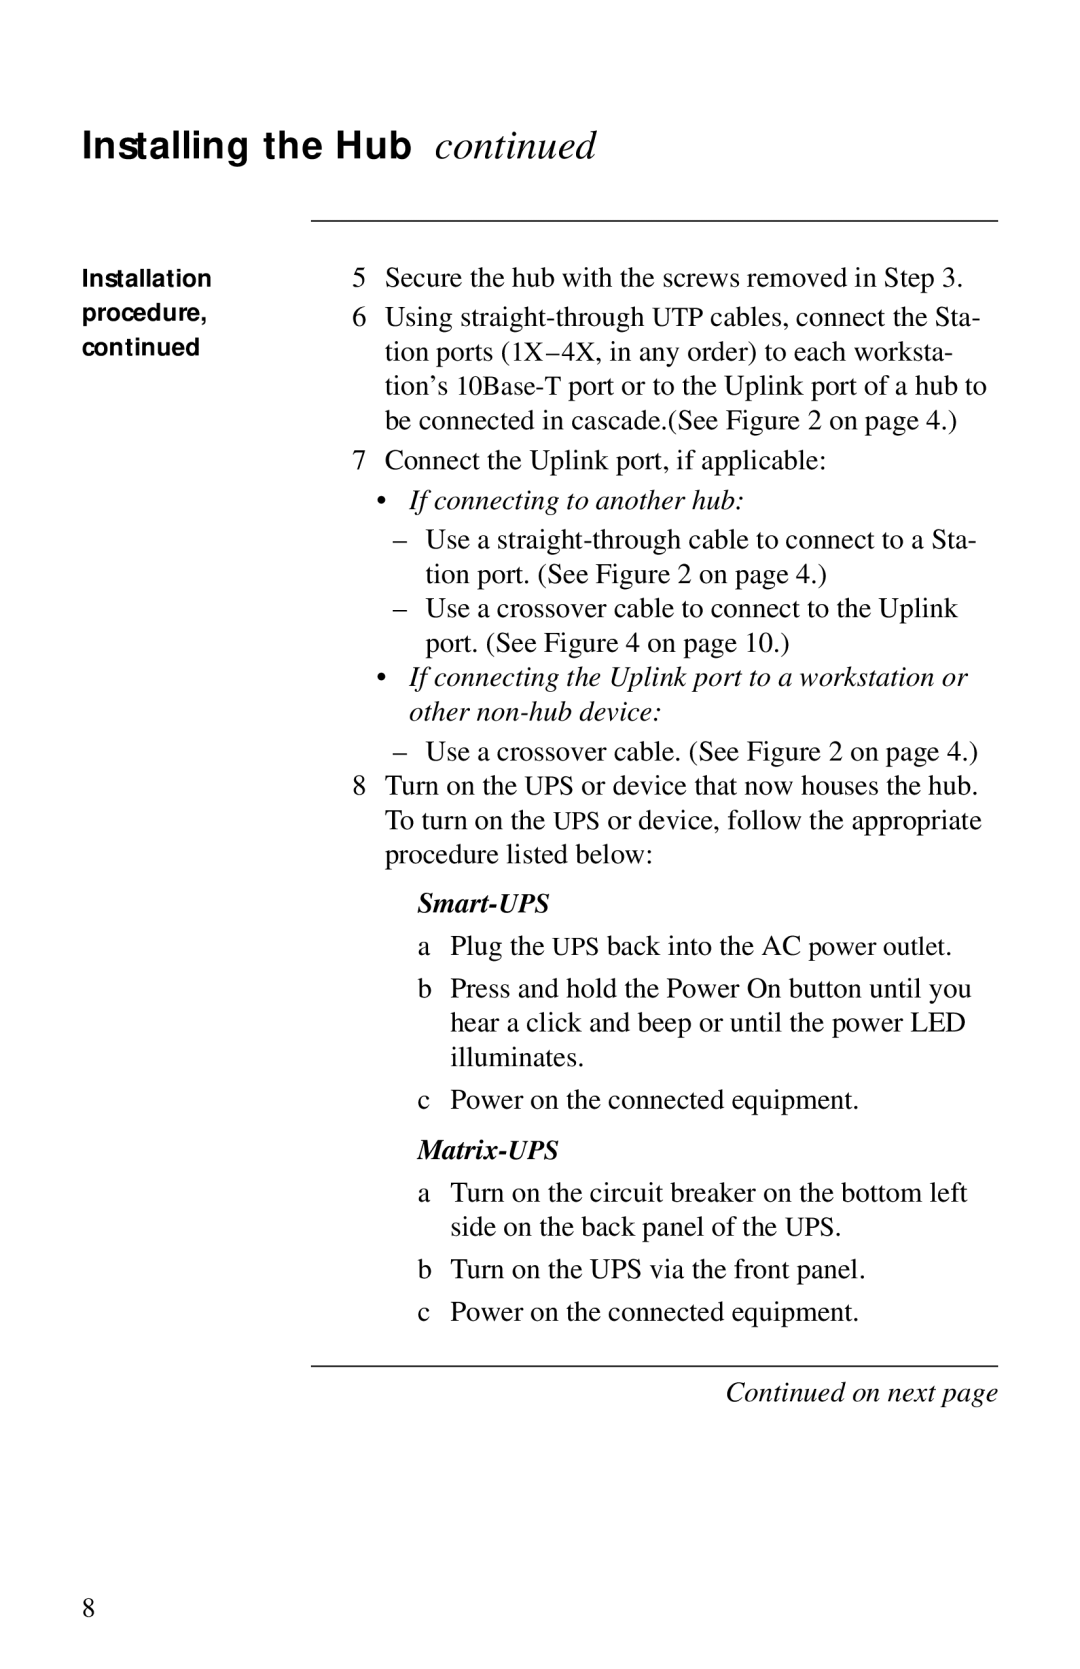 American Power Conversion AP9615 manual If connecting to another hub, If connecting the Uplink port to a workstation or 